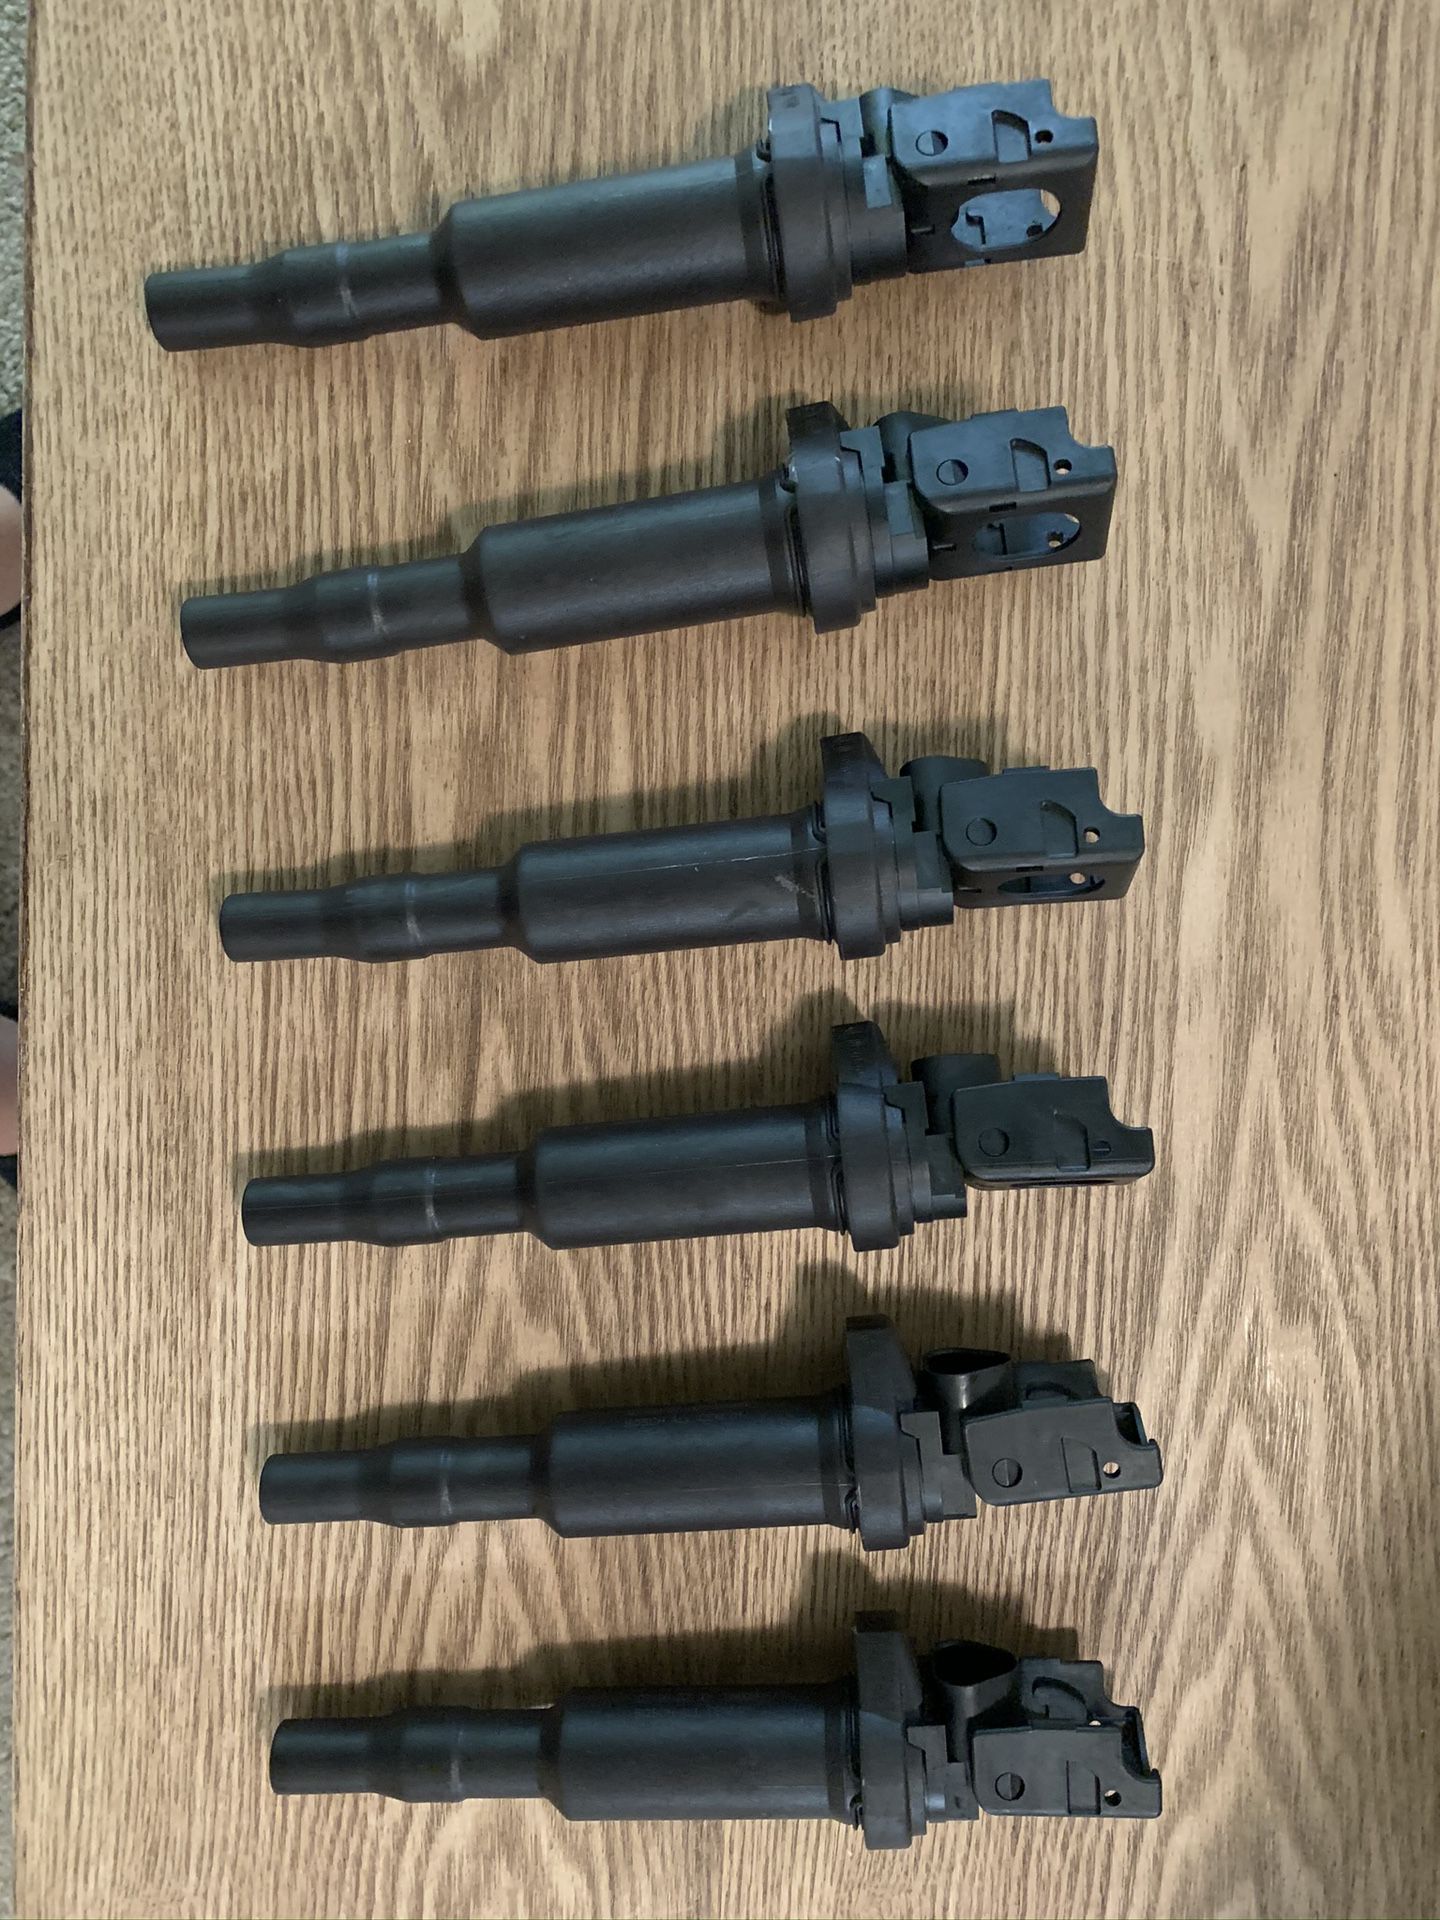 BMW Ignition Coils - Used